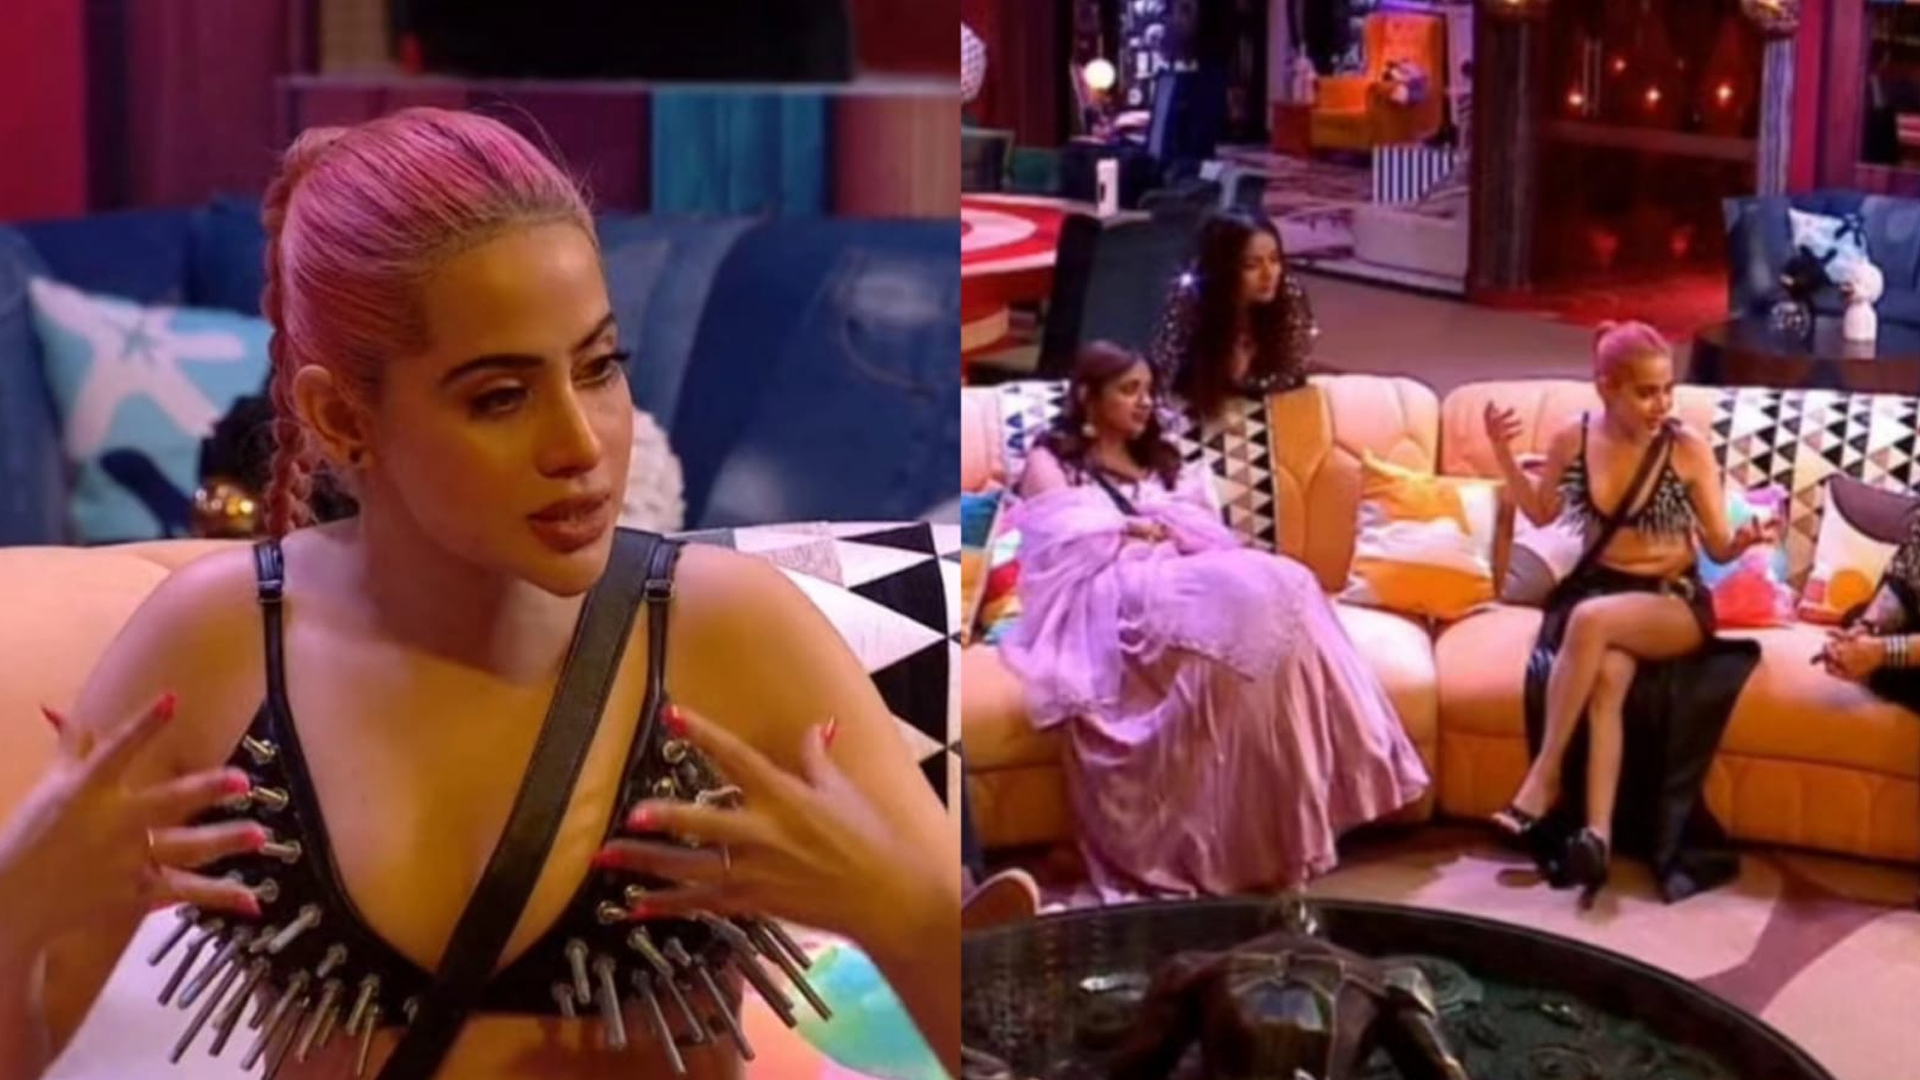 Uorfi Javed Opens Up About Her Journey and Struggles in the Bigg Boss OTT House